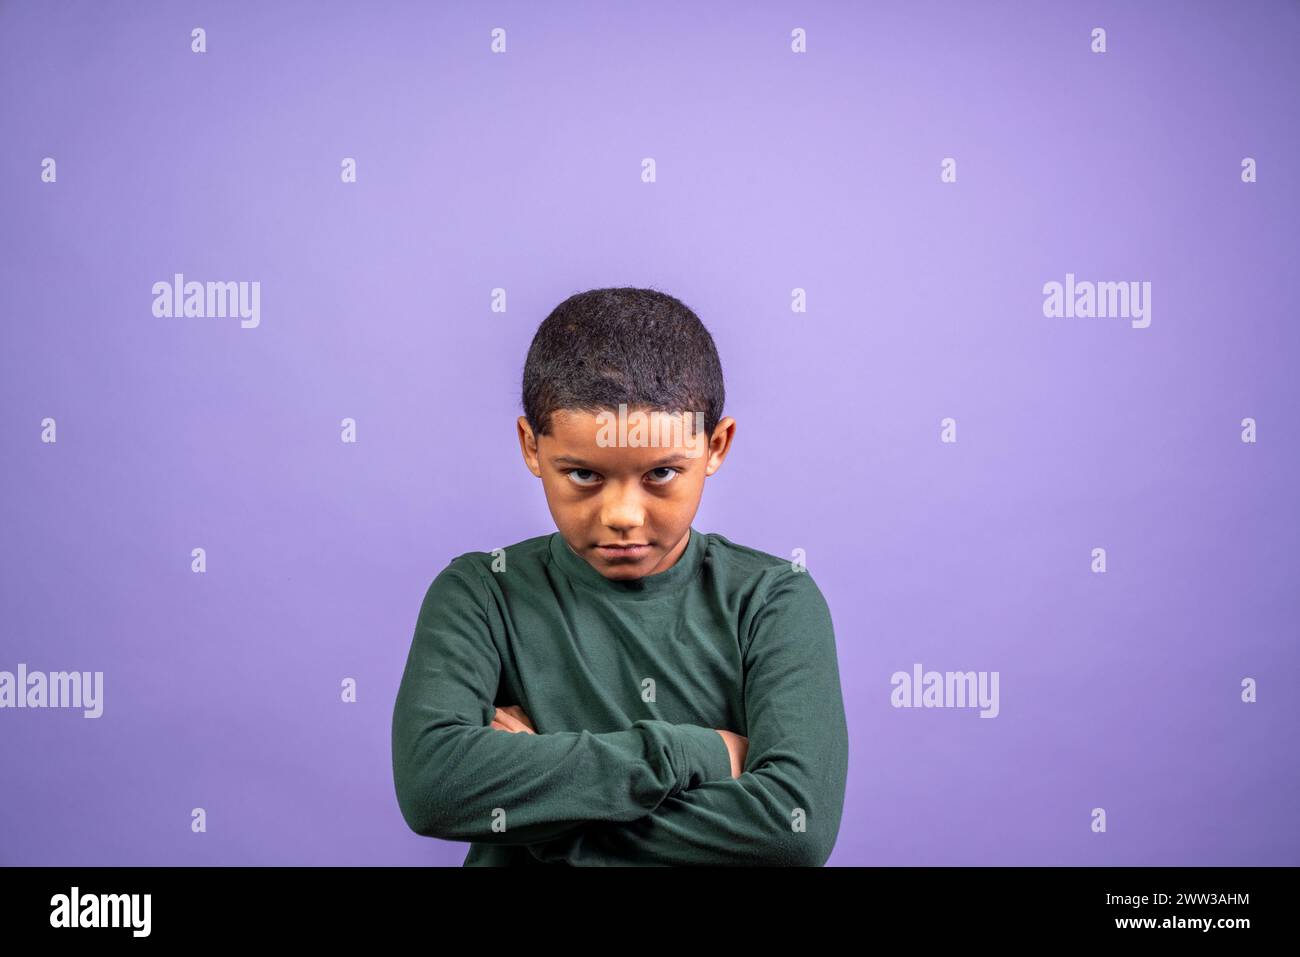 A young boy is standing with his arms crossed and looking down. He is upset or angry Stock Photo